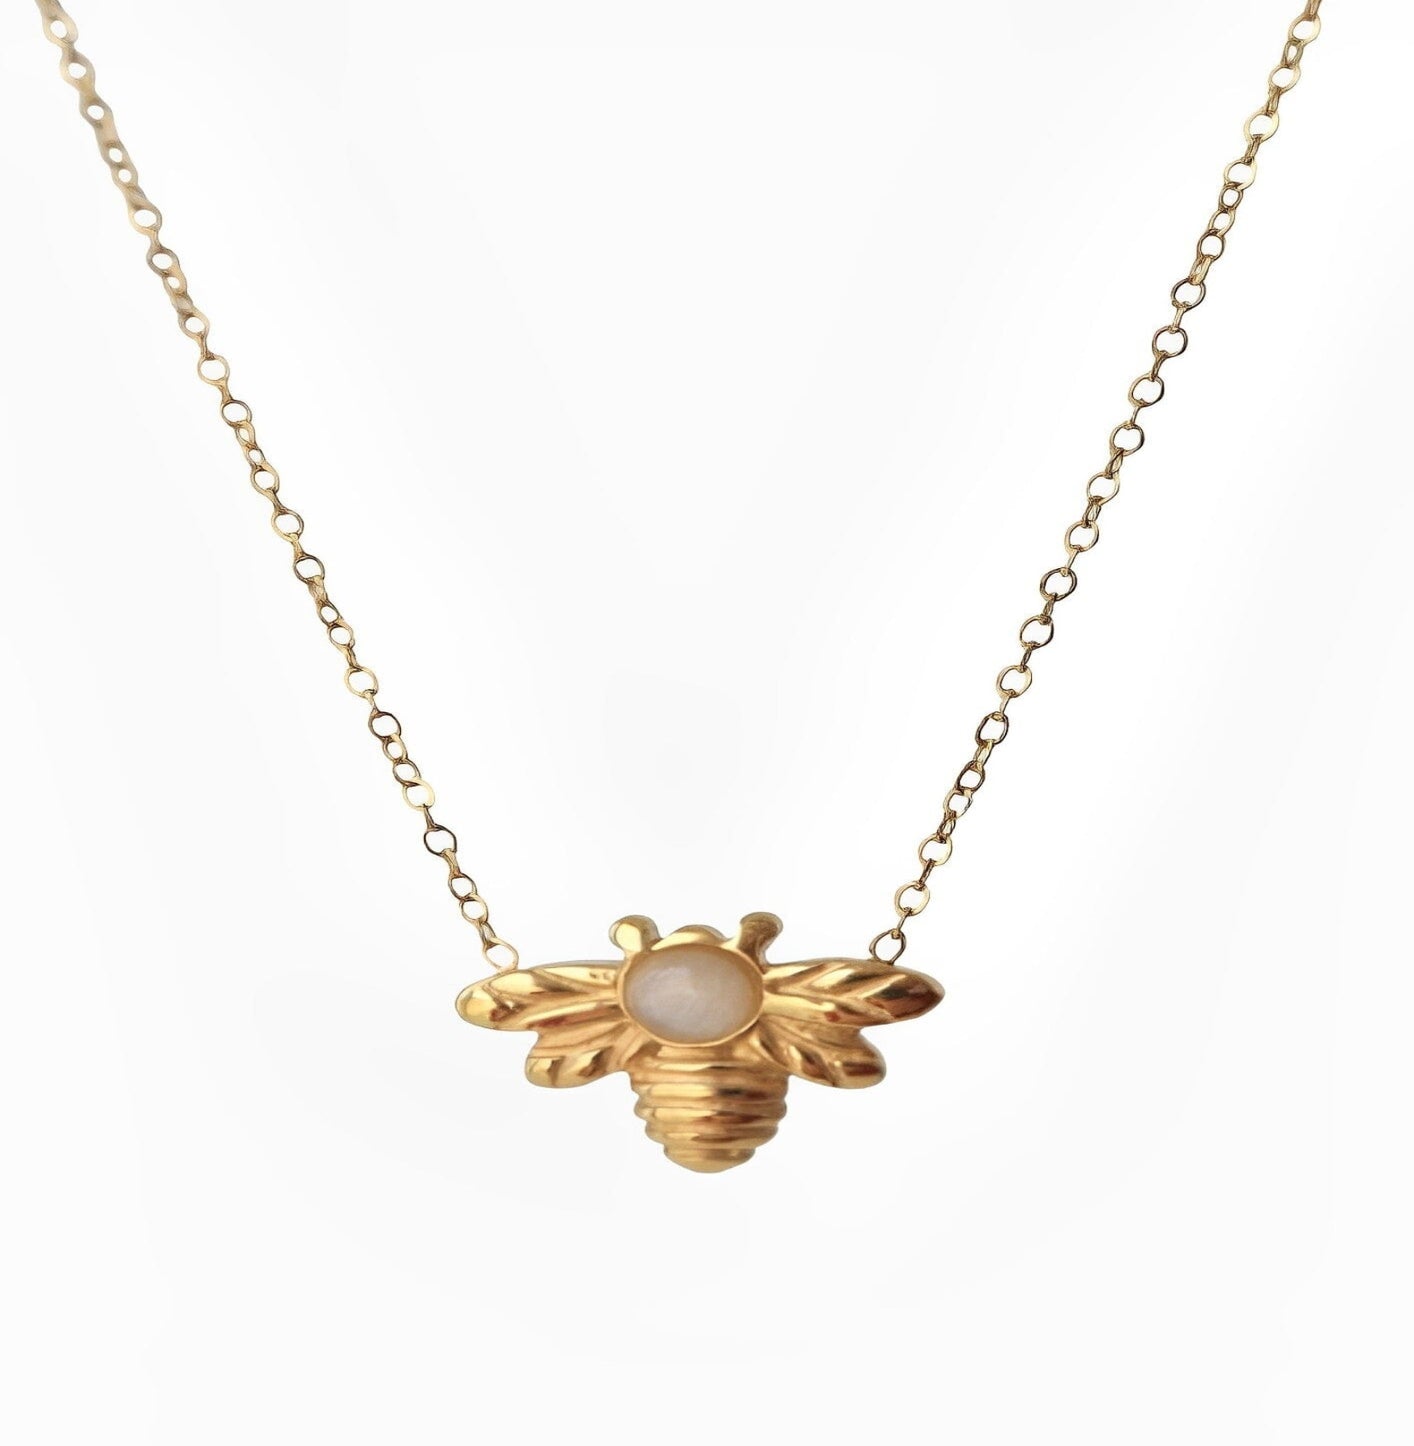 EYE BEE NECKLACE earing Yubama Jewelry Online Store - The Elegant Designs of Gold and Silver ! 